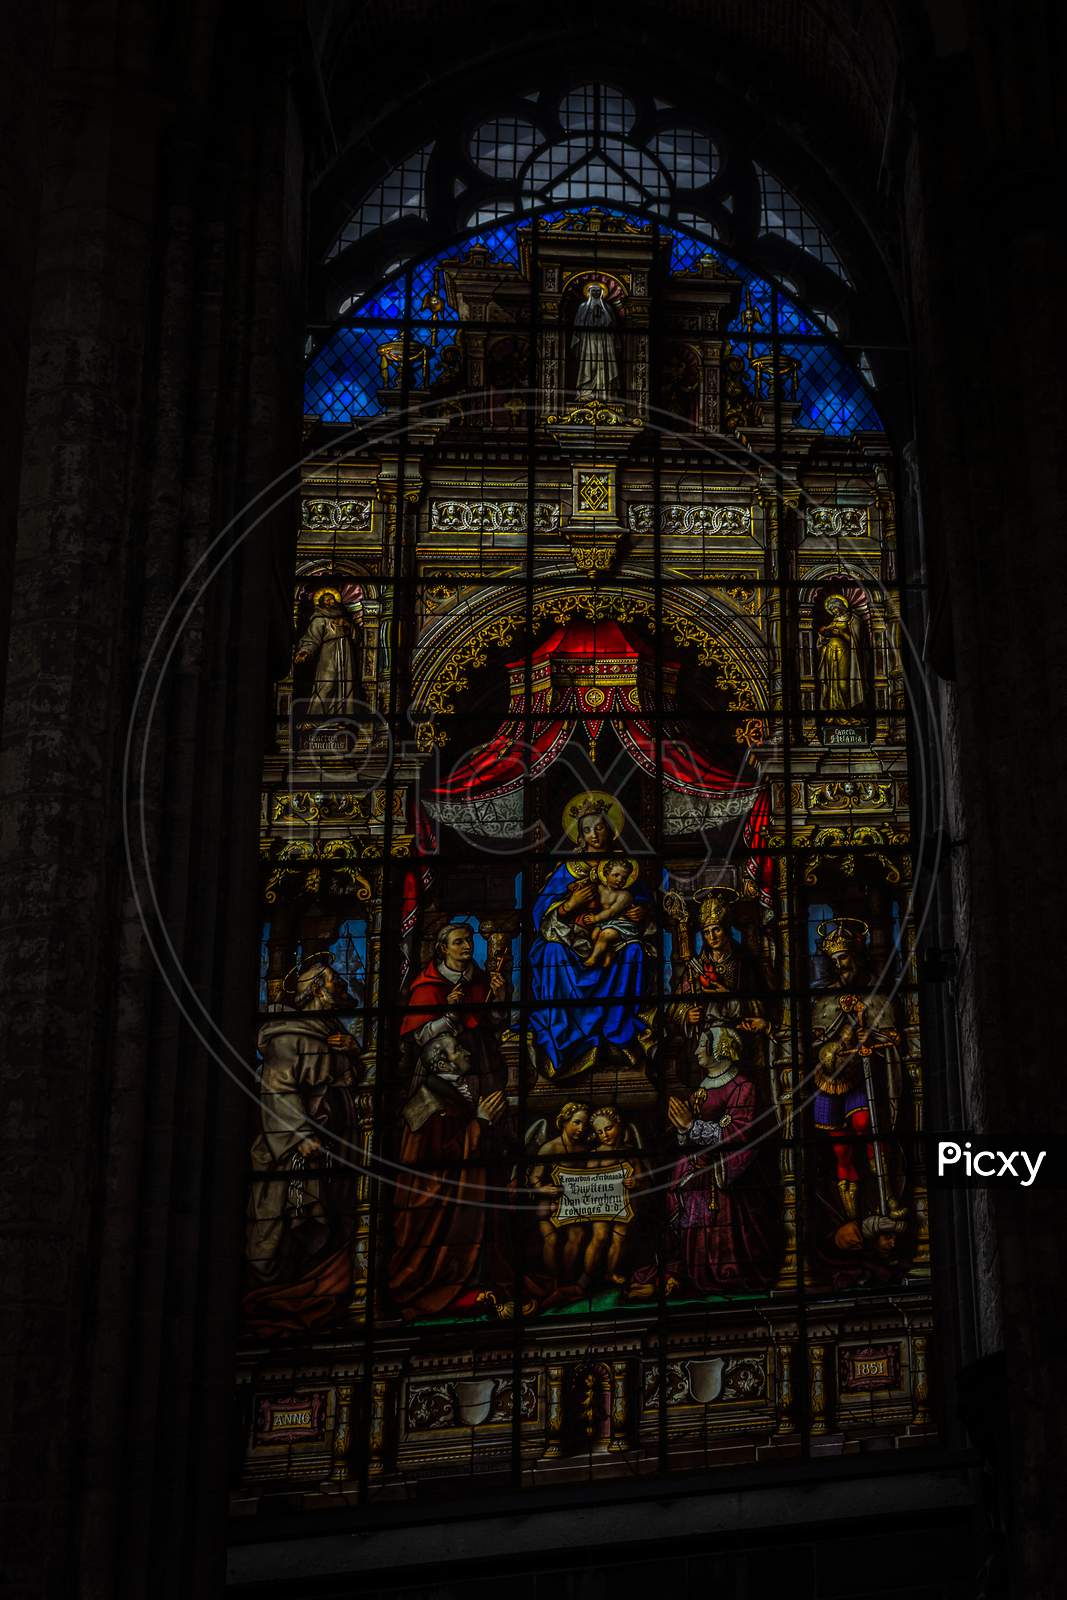 Ghent Belgium - April 15 : An Image Of Mary And Baby Jesus Is Etched On A Window Pane In Saint Nicholas Church, Ghent, Belgium